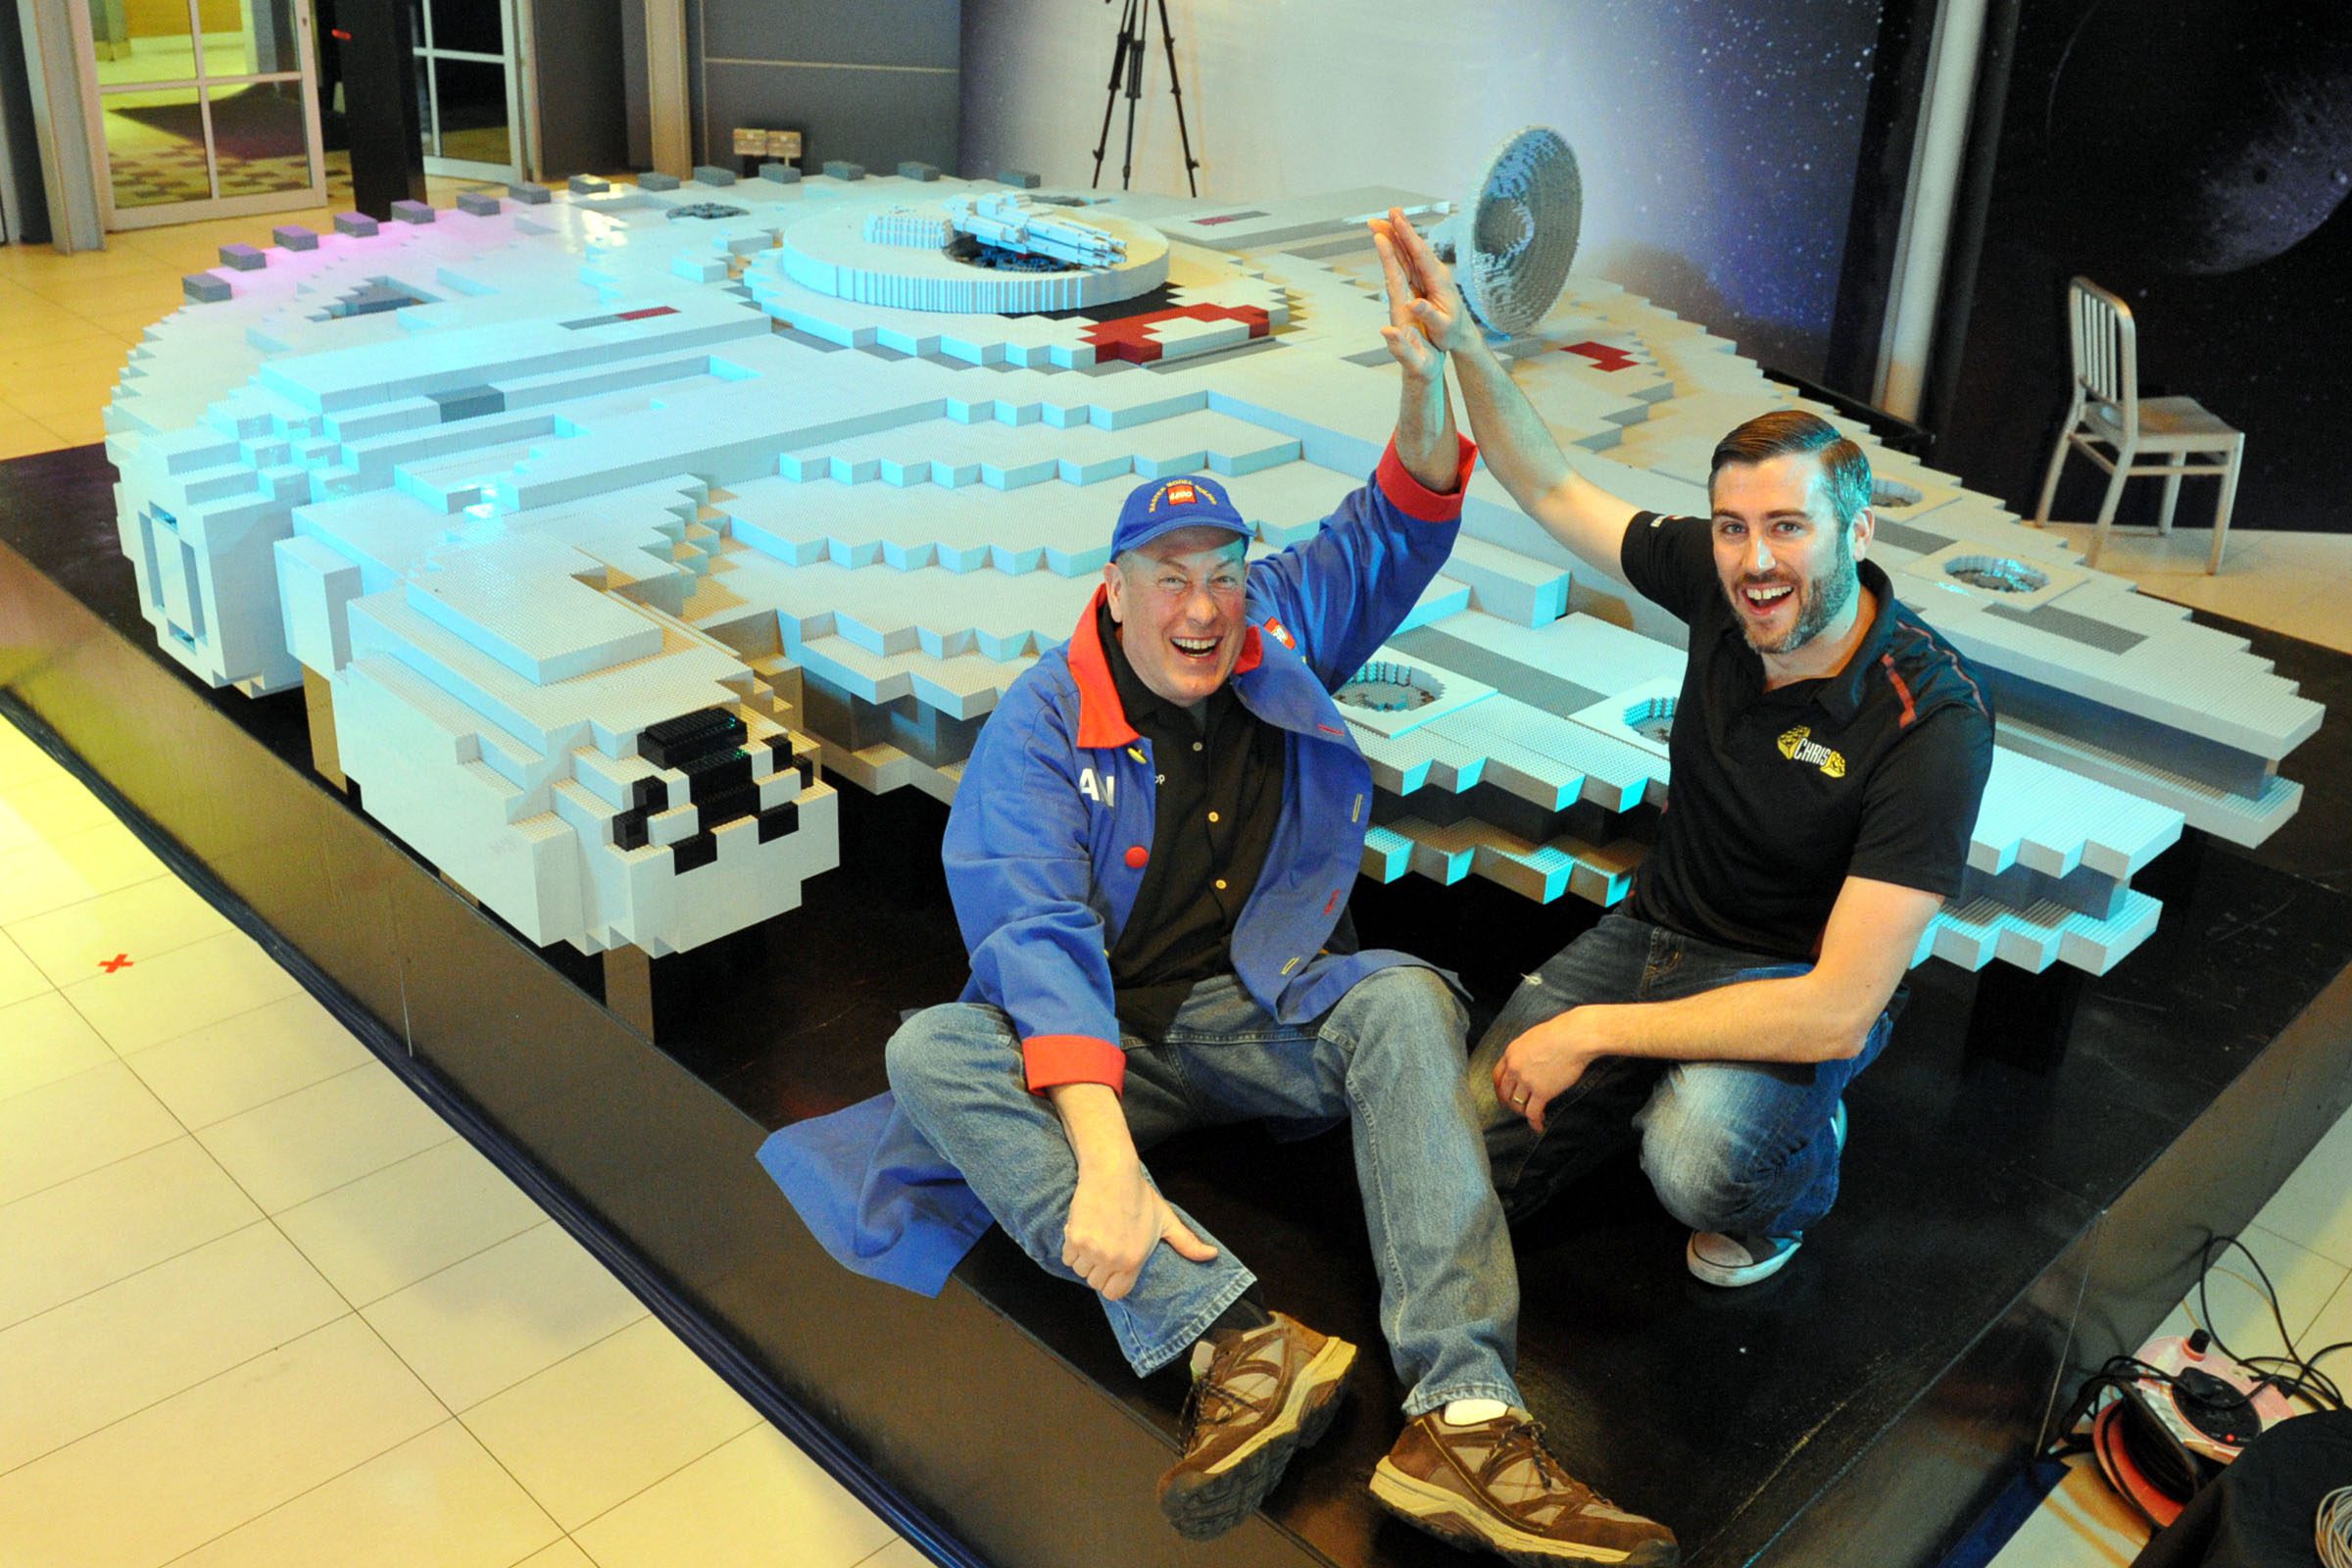 Dan and Chris Steininger elated at the completion of the LEGO replica of the Millennium Falcon. (Legoland Malaysia)